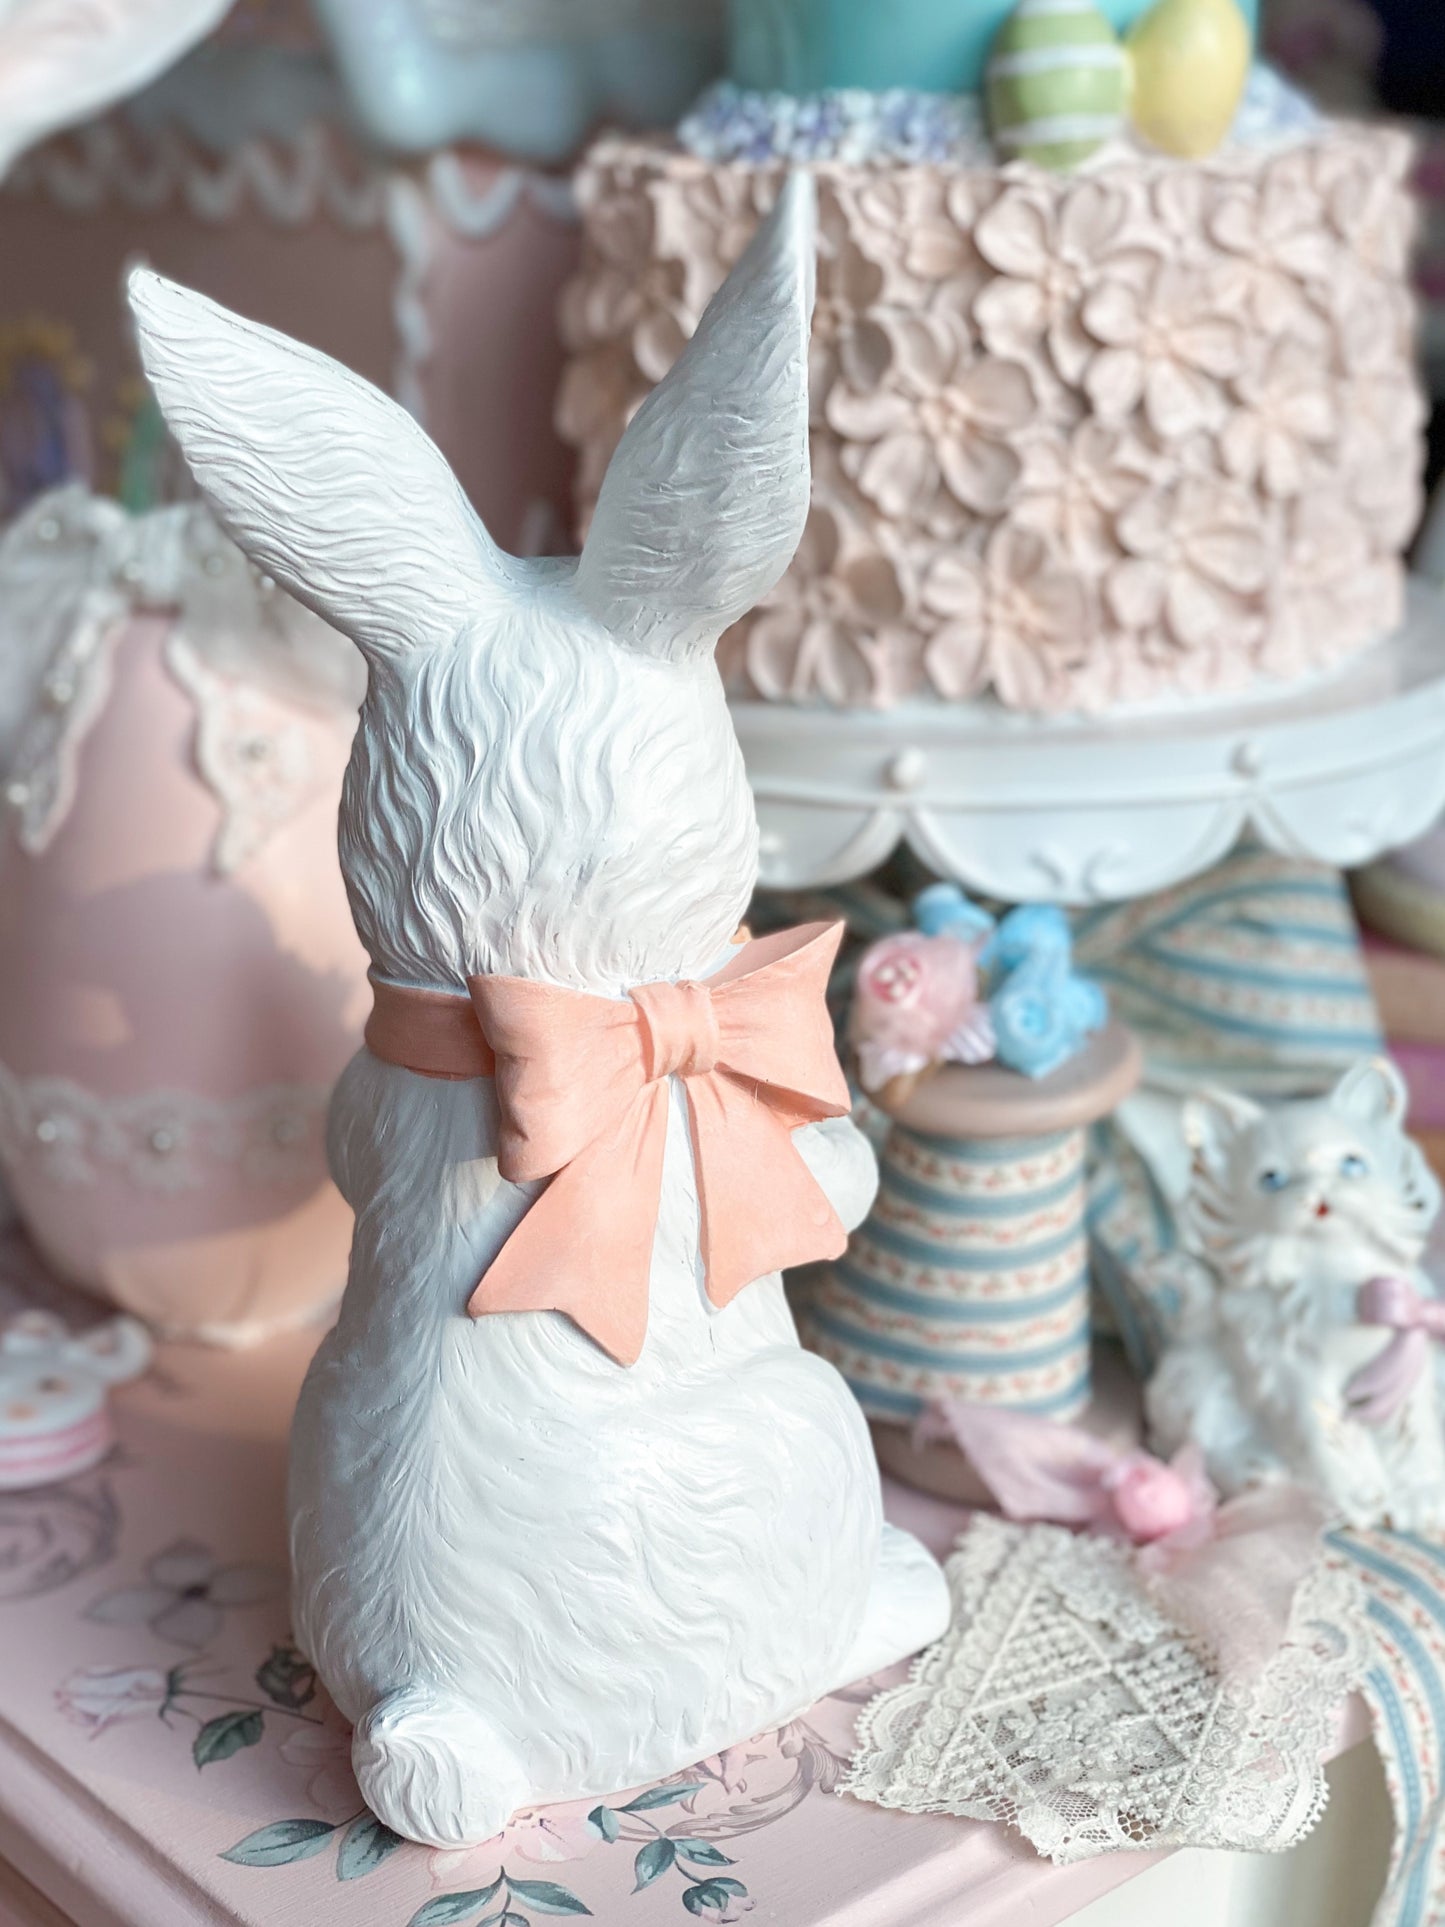 Pastel Easter Bunny holding baby Chick in Basket